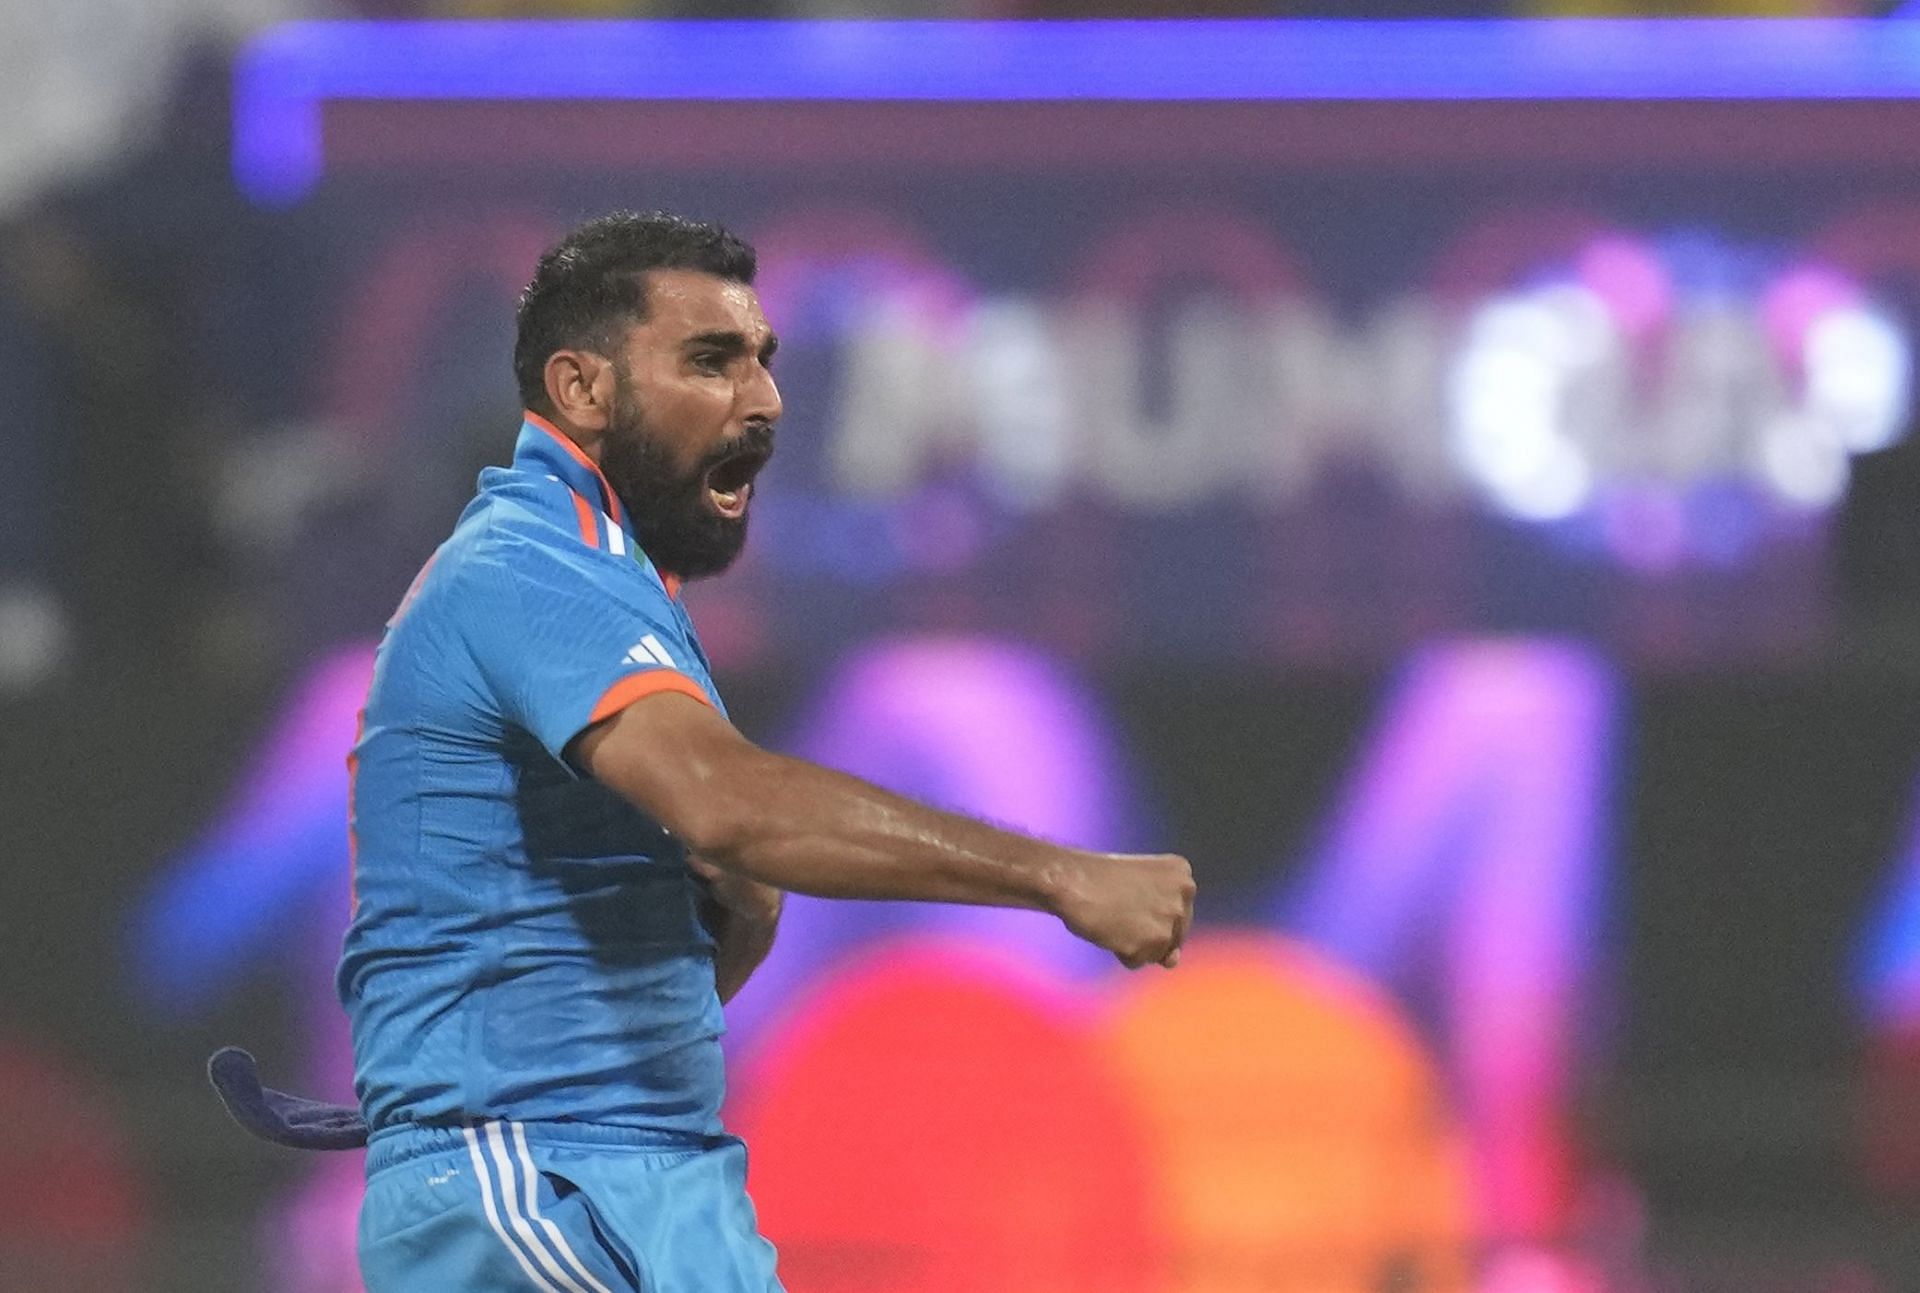 Mohammed Shami picked up two wickets in his first burst